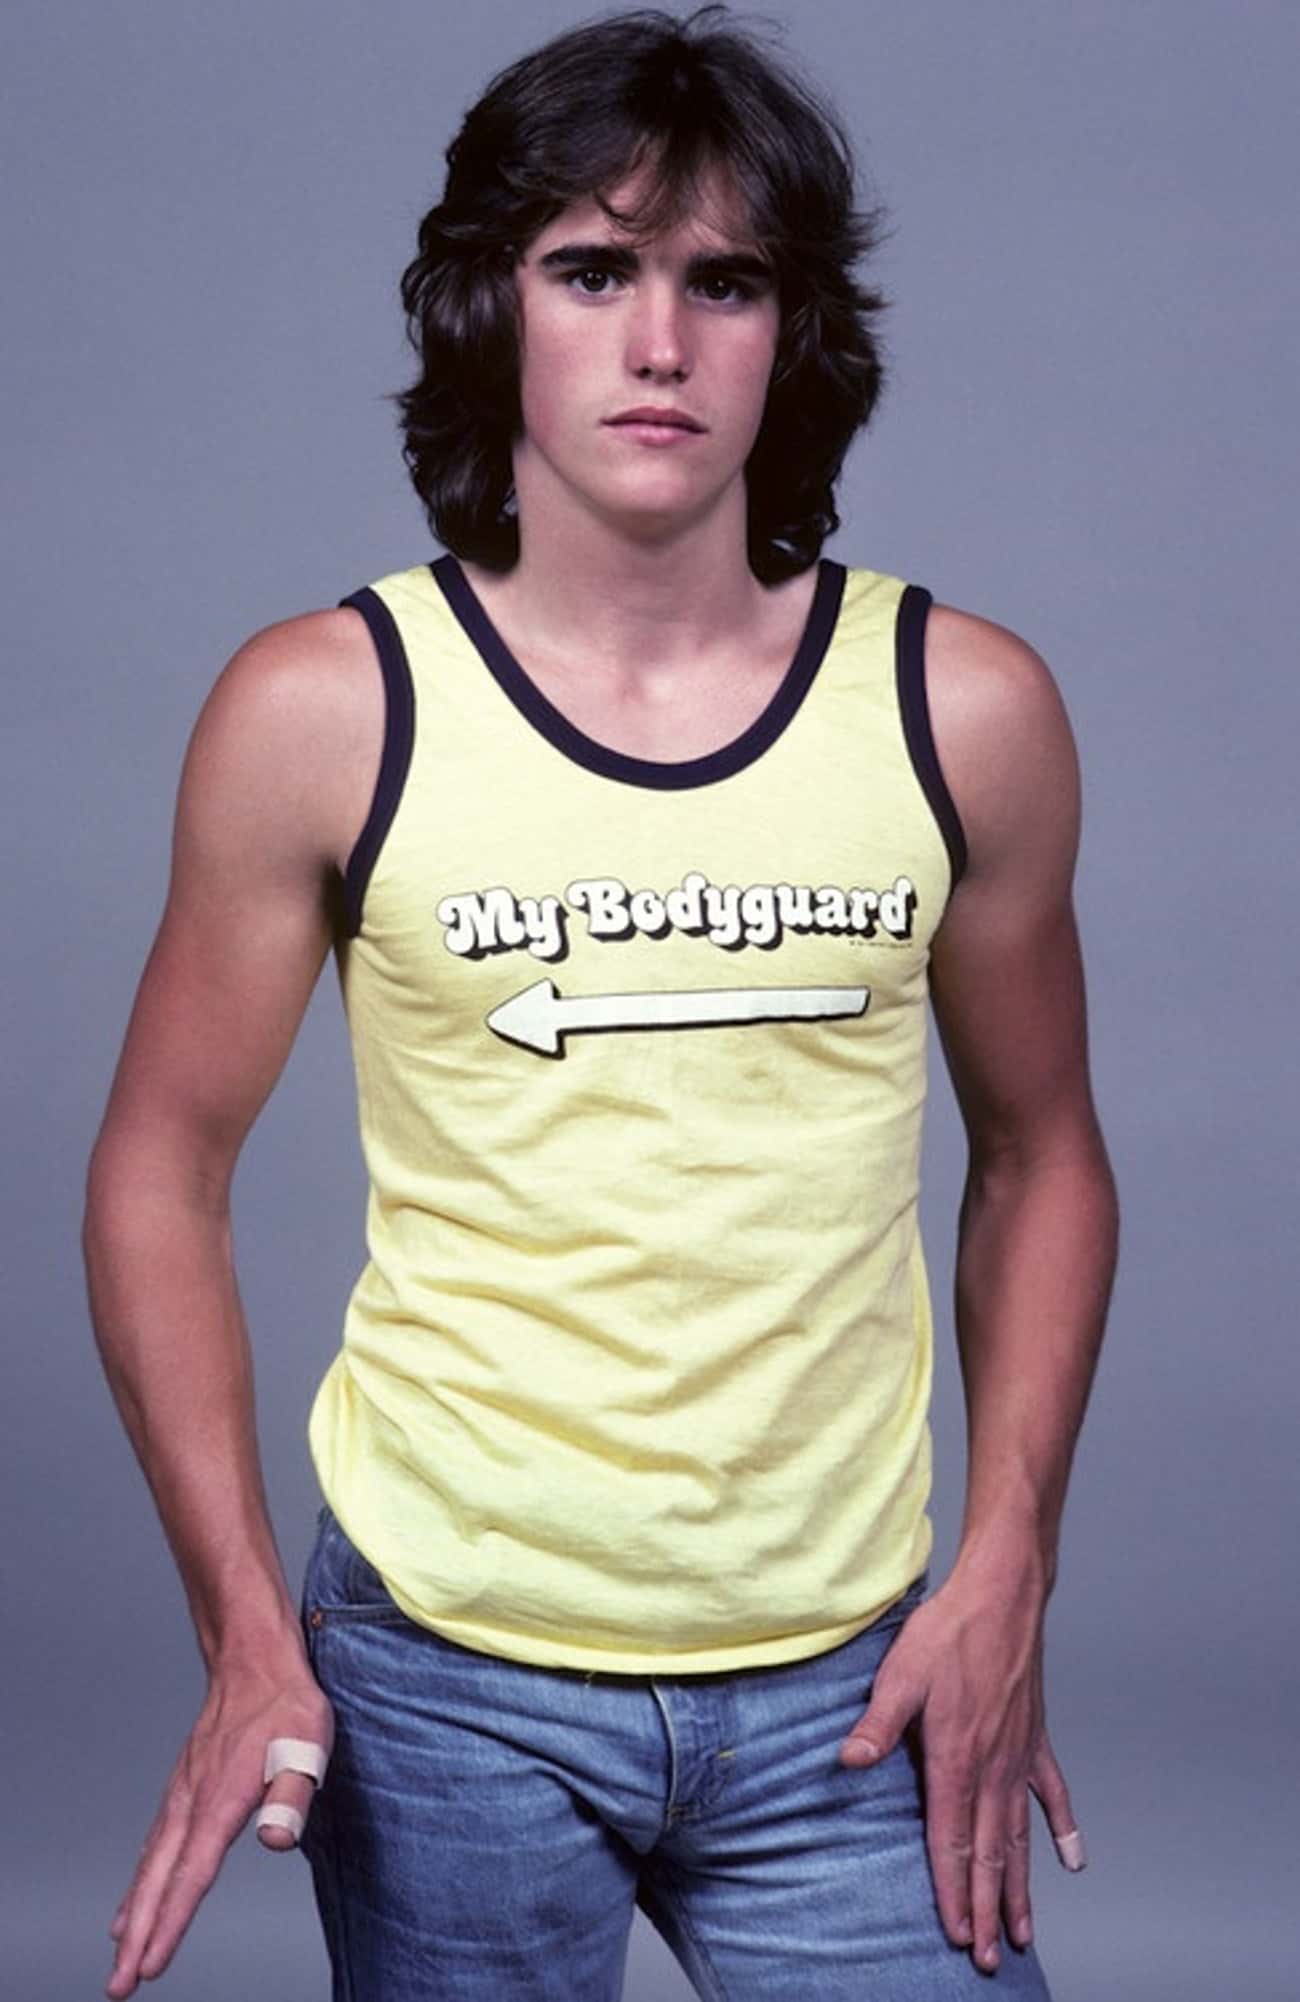 Young Matt Dillon in Yellow Printed Tank Top and Jeans